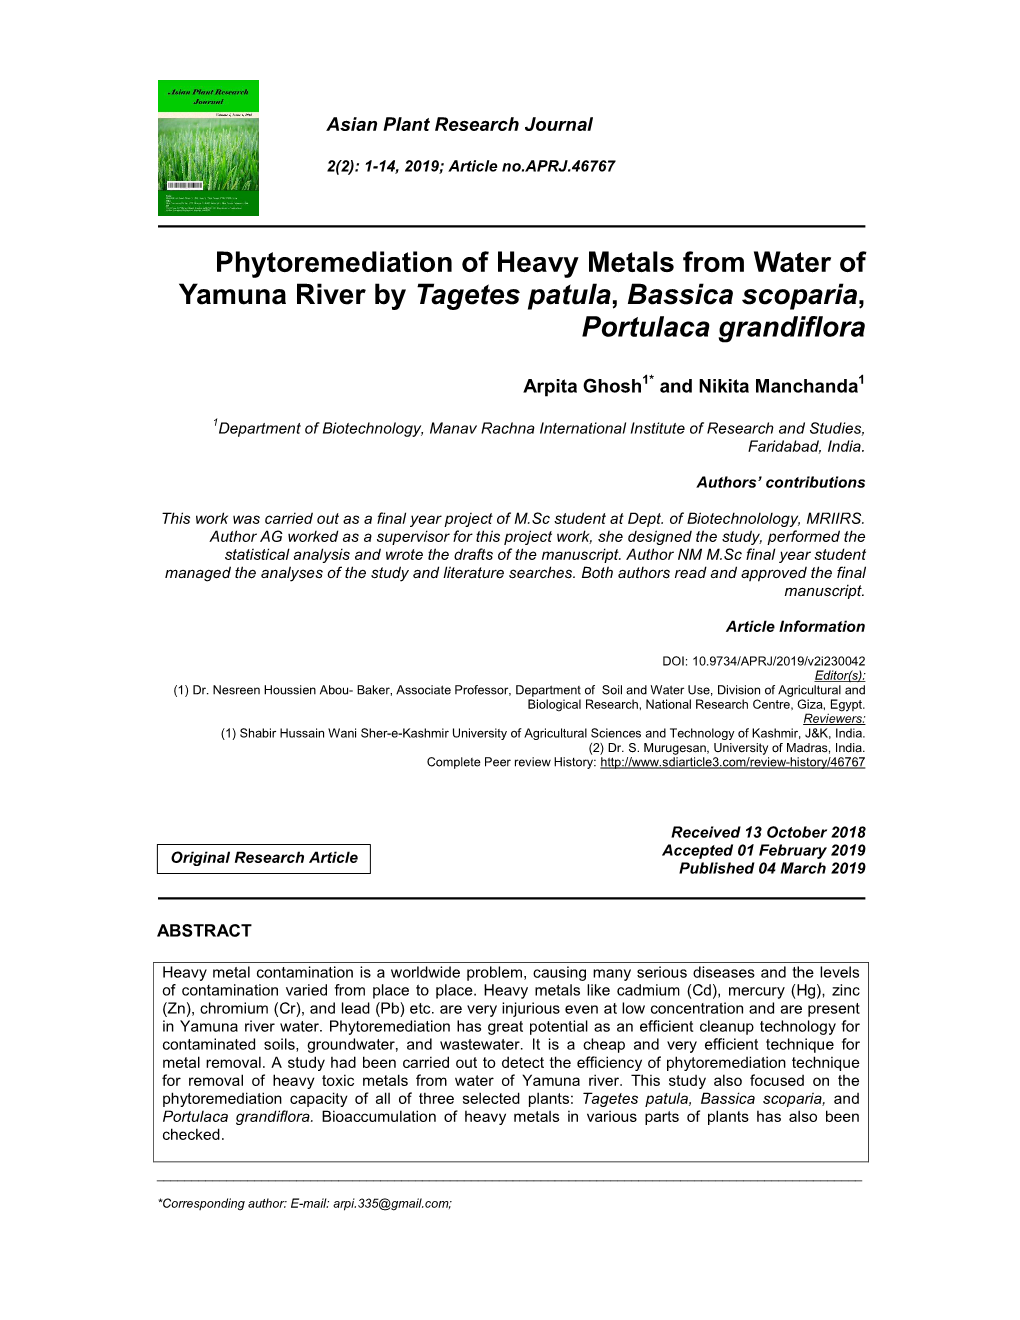 Phytoremediation of Heavy Metals from Water of Yamuna River by Tagetes Patula, Bassica Scoparia, Portulaca Grandiflora